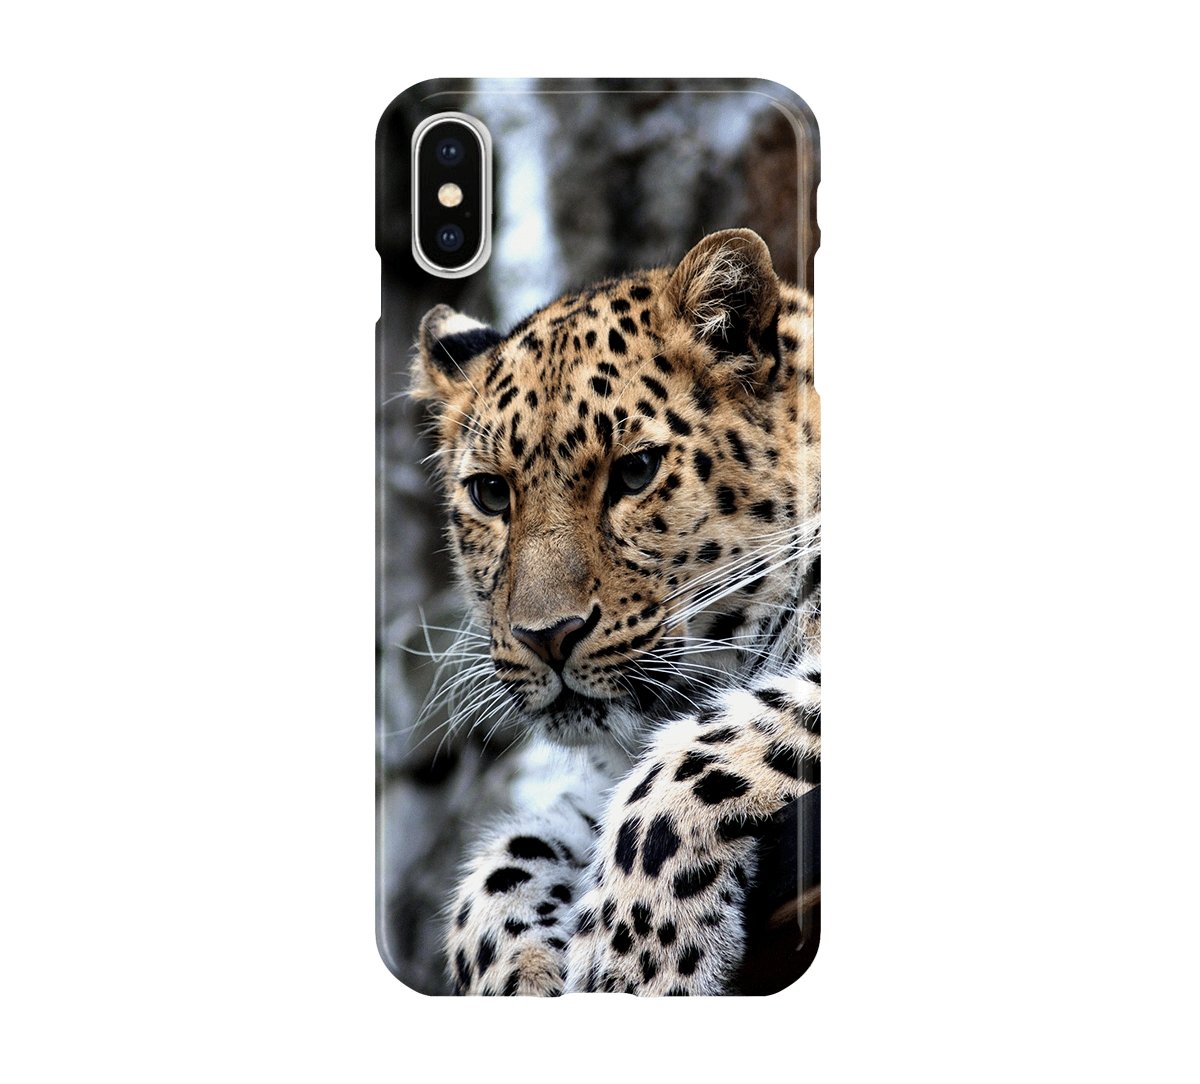 Leopard I - iPhone phone case designs by CaseSwagger